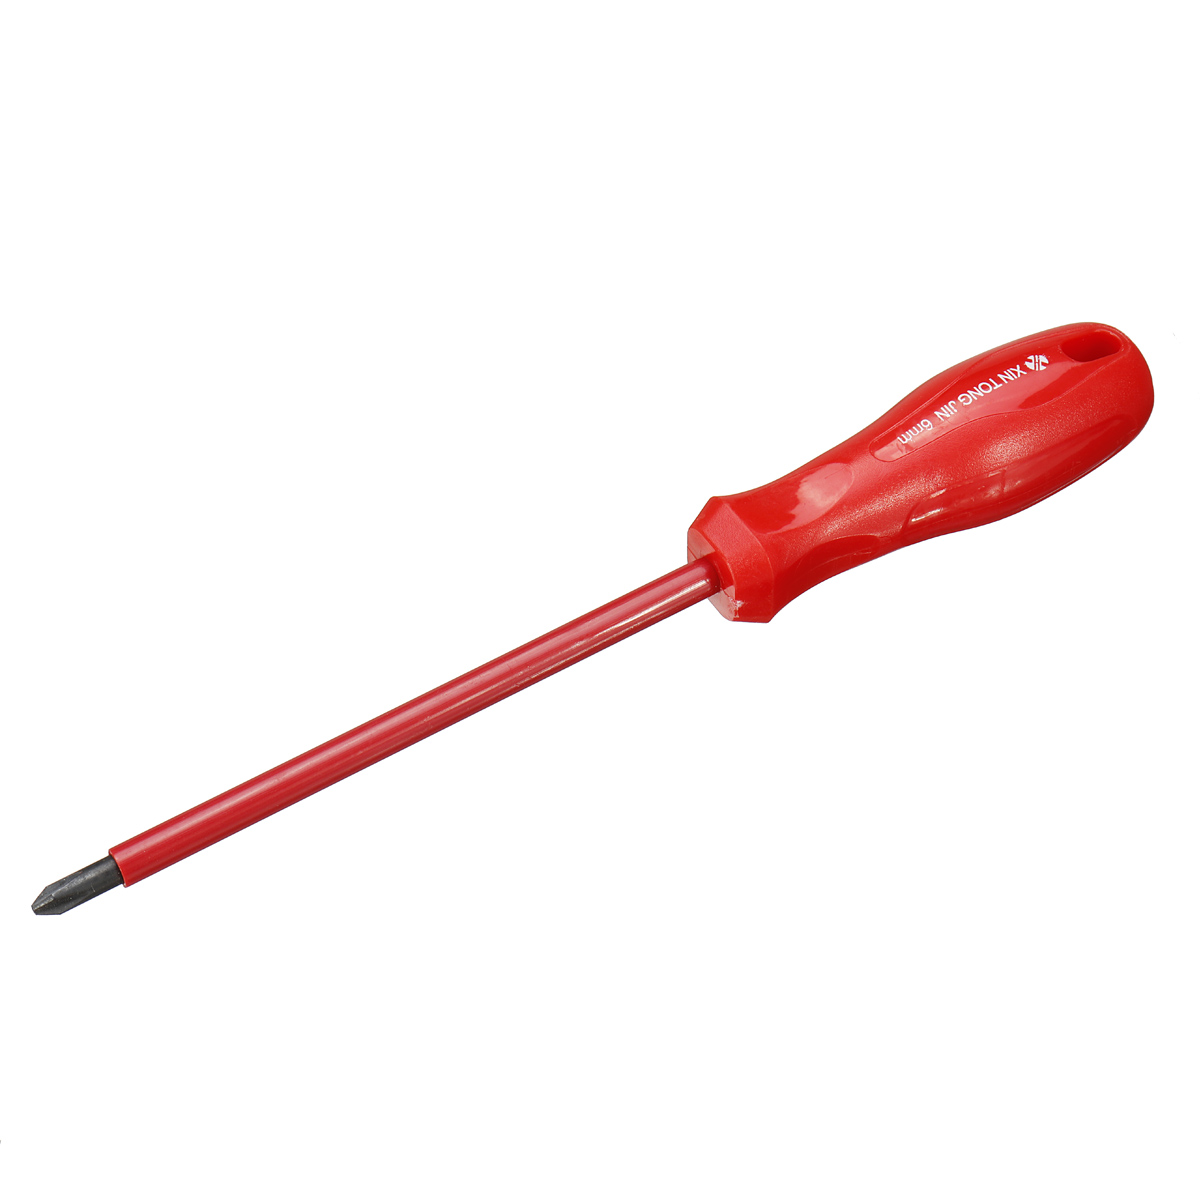 1000V-Electronic-Insulated-Hand-Screwdriver-Repair-Tool-1633166-6